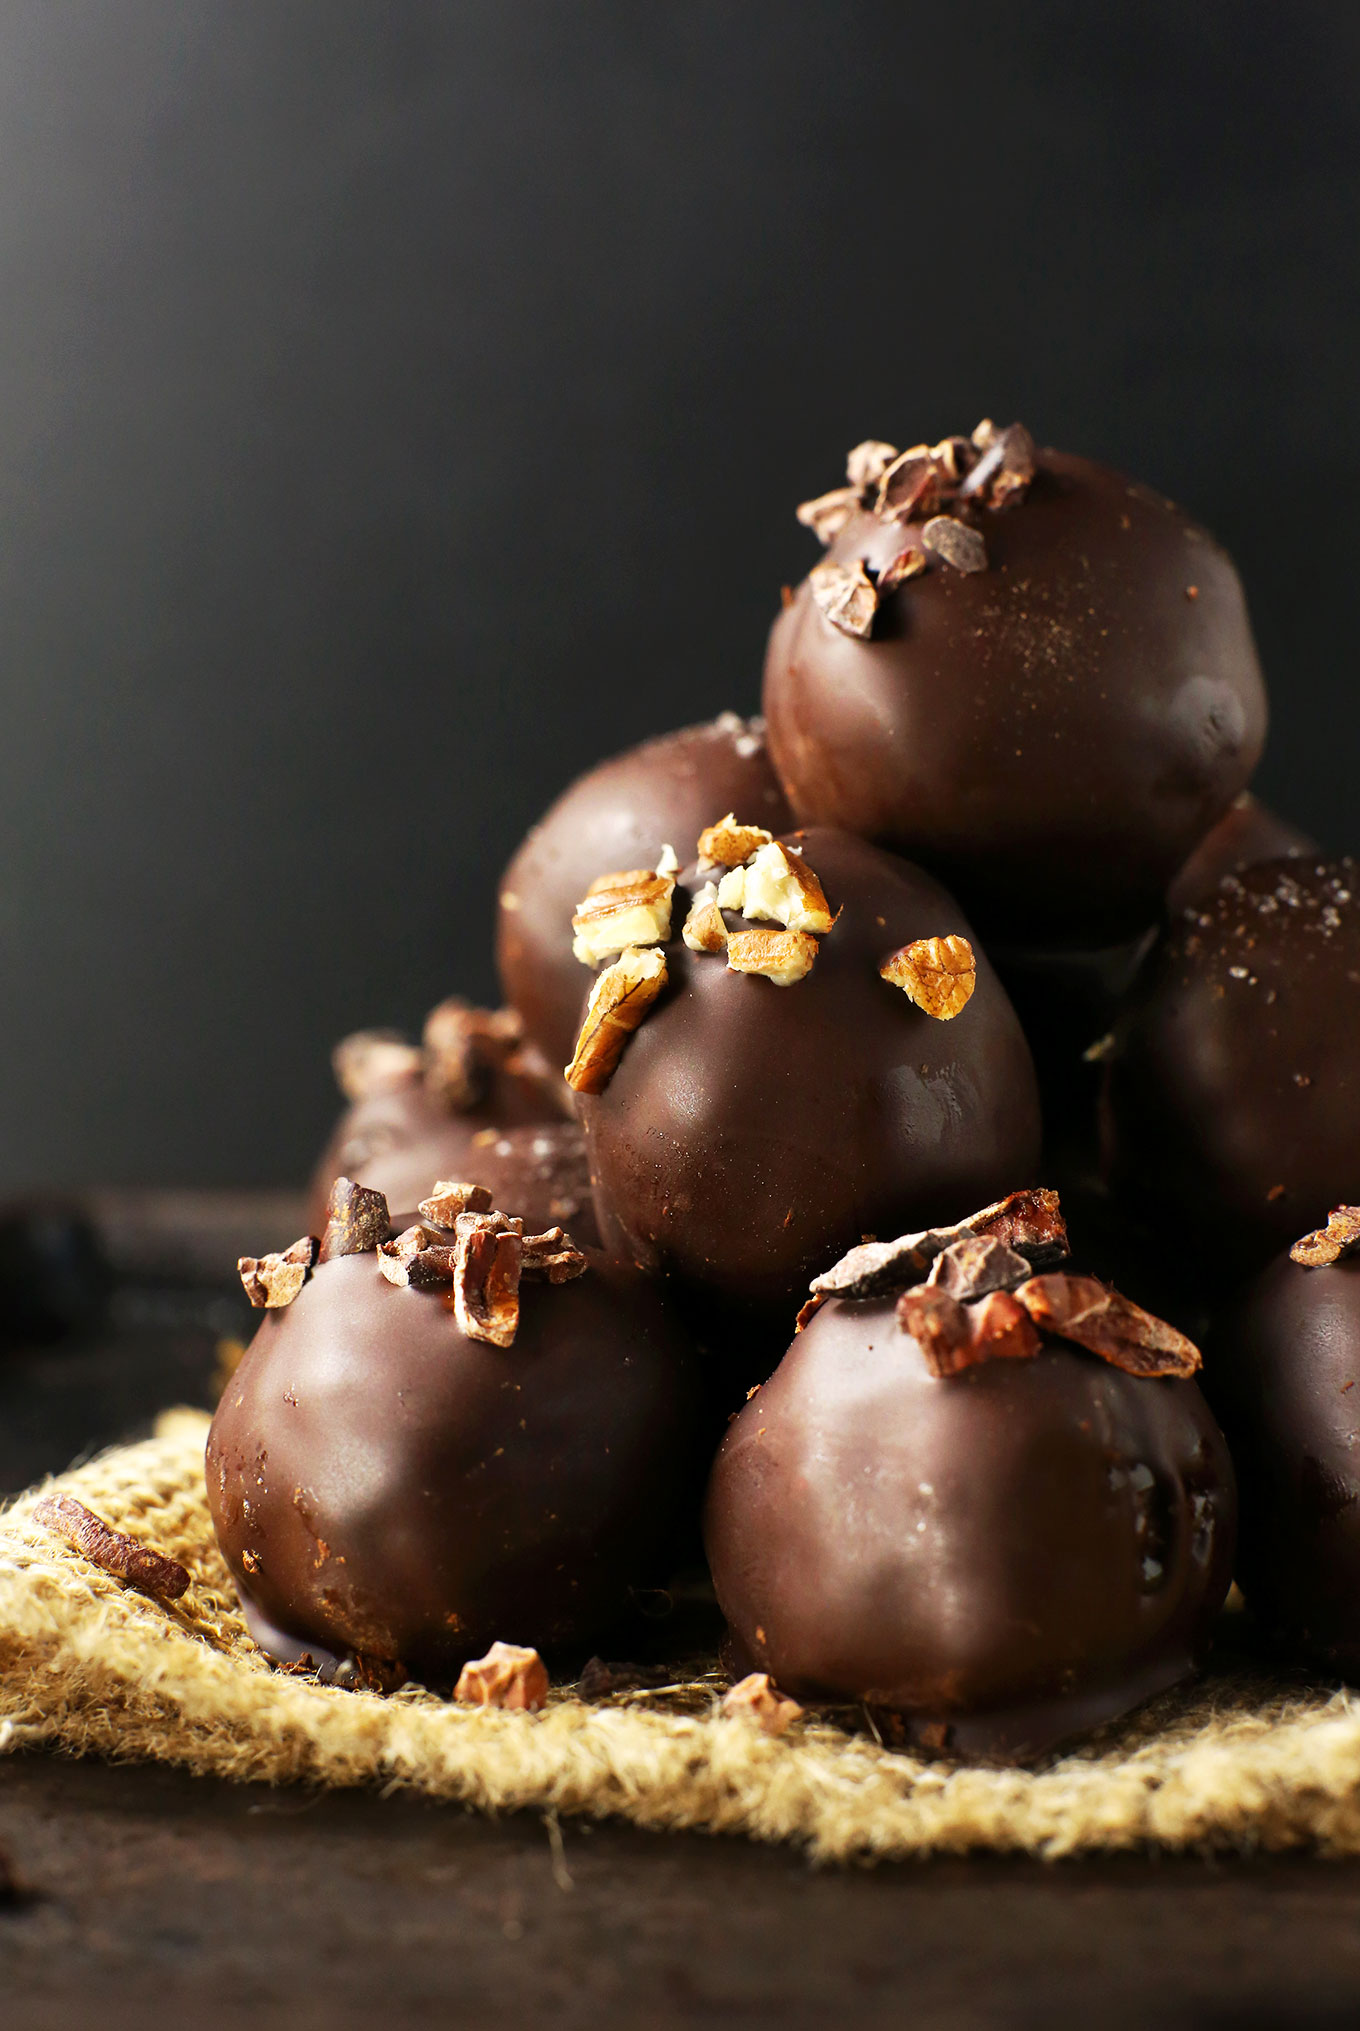 Pile of healthy Vegan Chocolate Truffles topped with pecans and cacao nibs